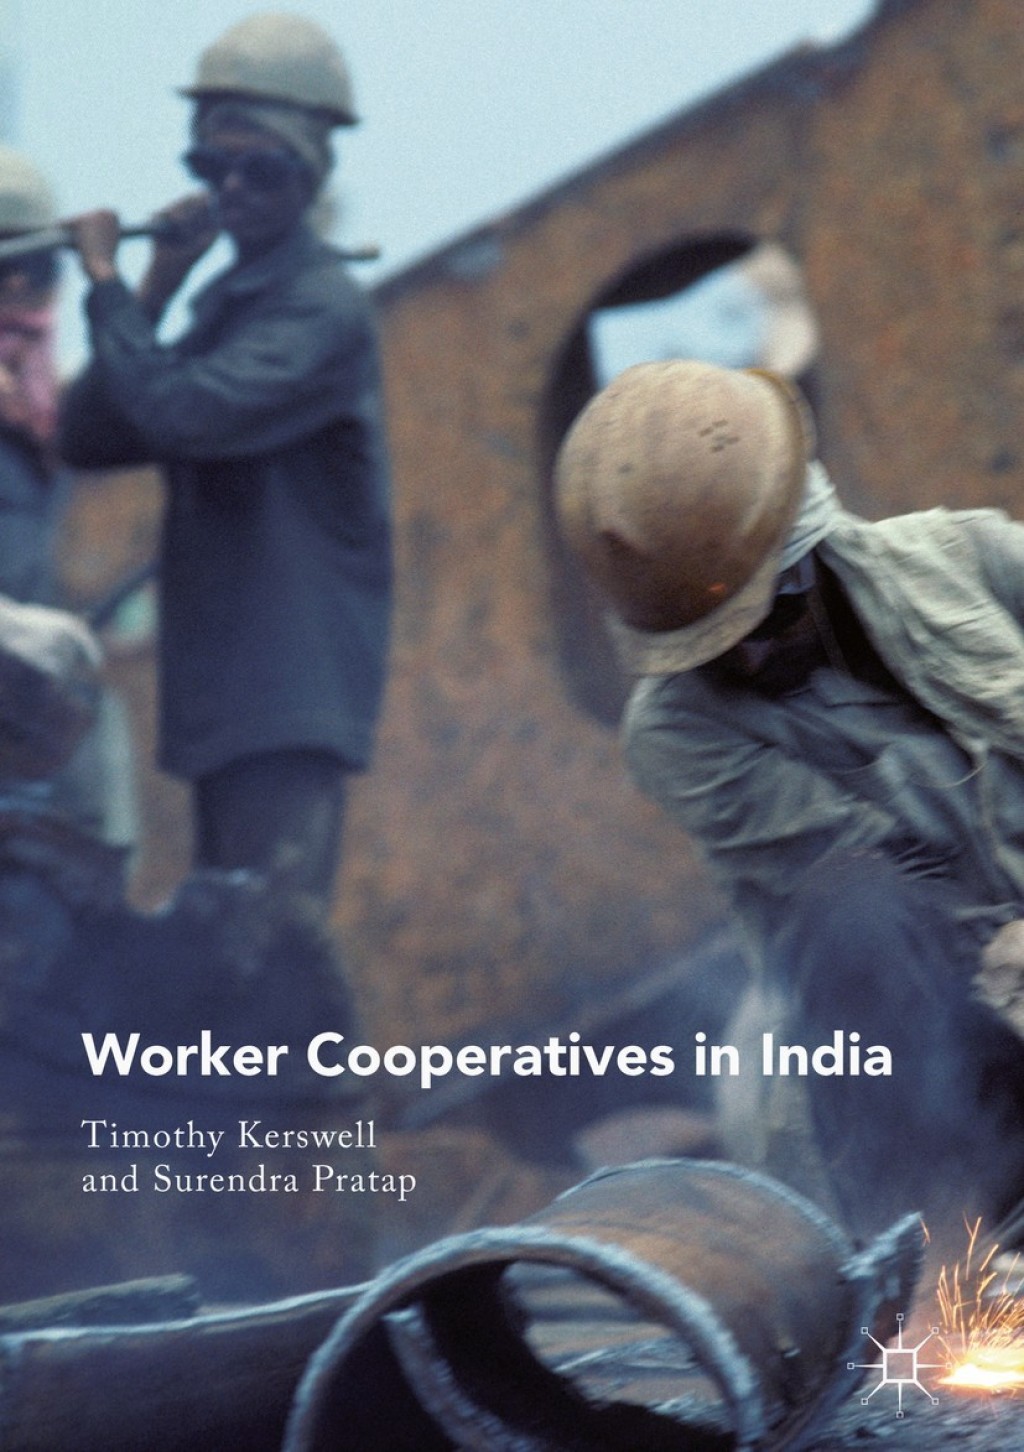 ISBN 9789811303838 product image for Worker Cooperatives in India (eBook Rental) | upcitemdb.com